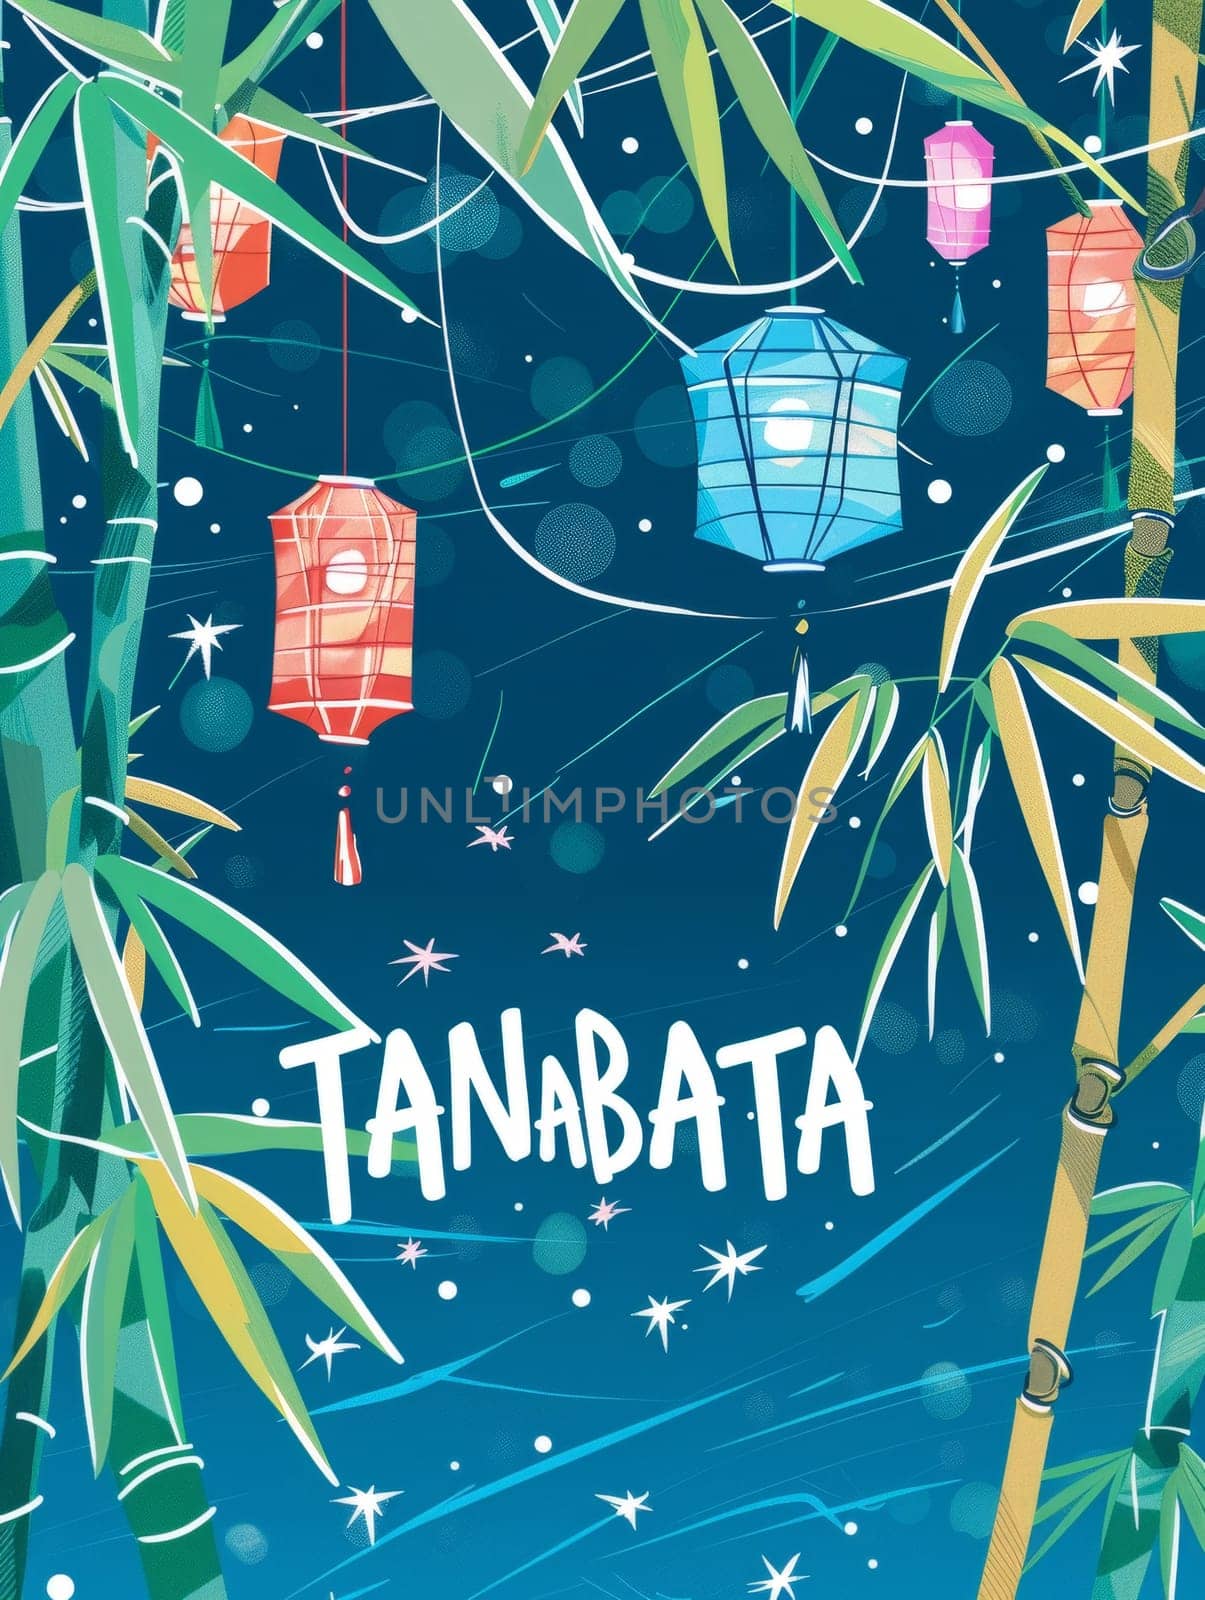 A vivid Tanabata night scene captured with colorful paper lanterns hanging amidst bamboo leaves, sparkling against a starry background in a festive display. by sfinks